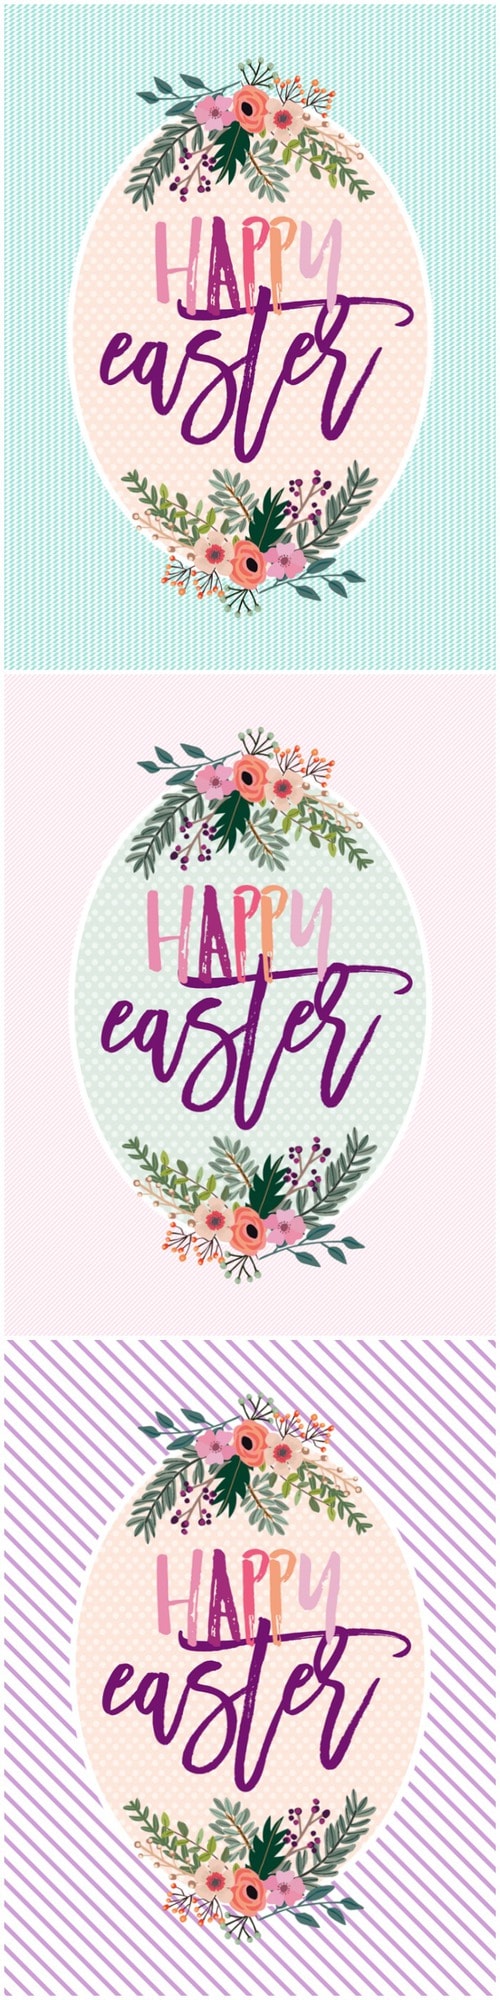 FREE Happy Easter Printables - available to download in 3 colors!